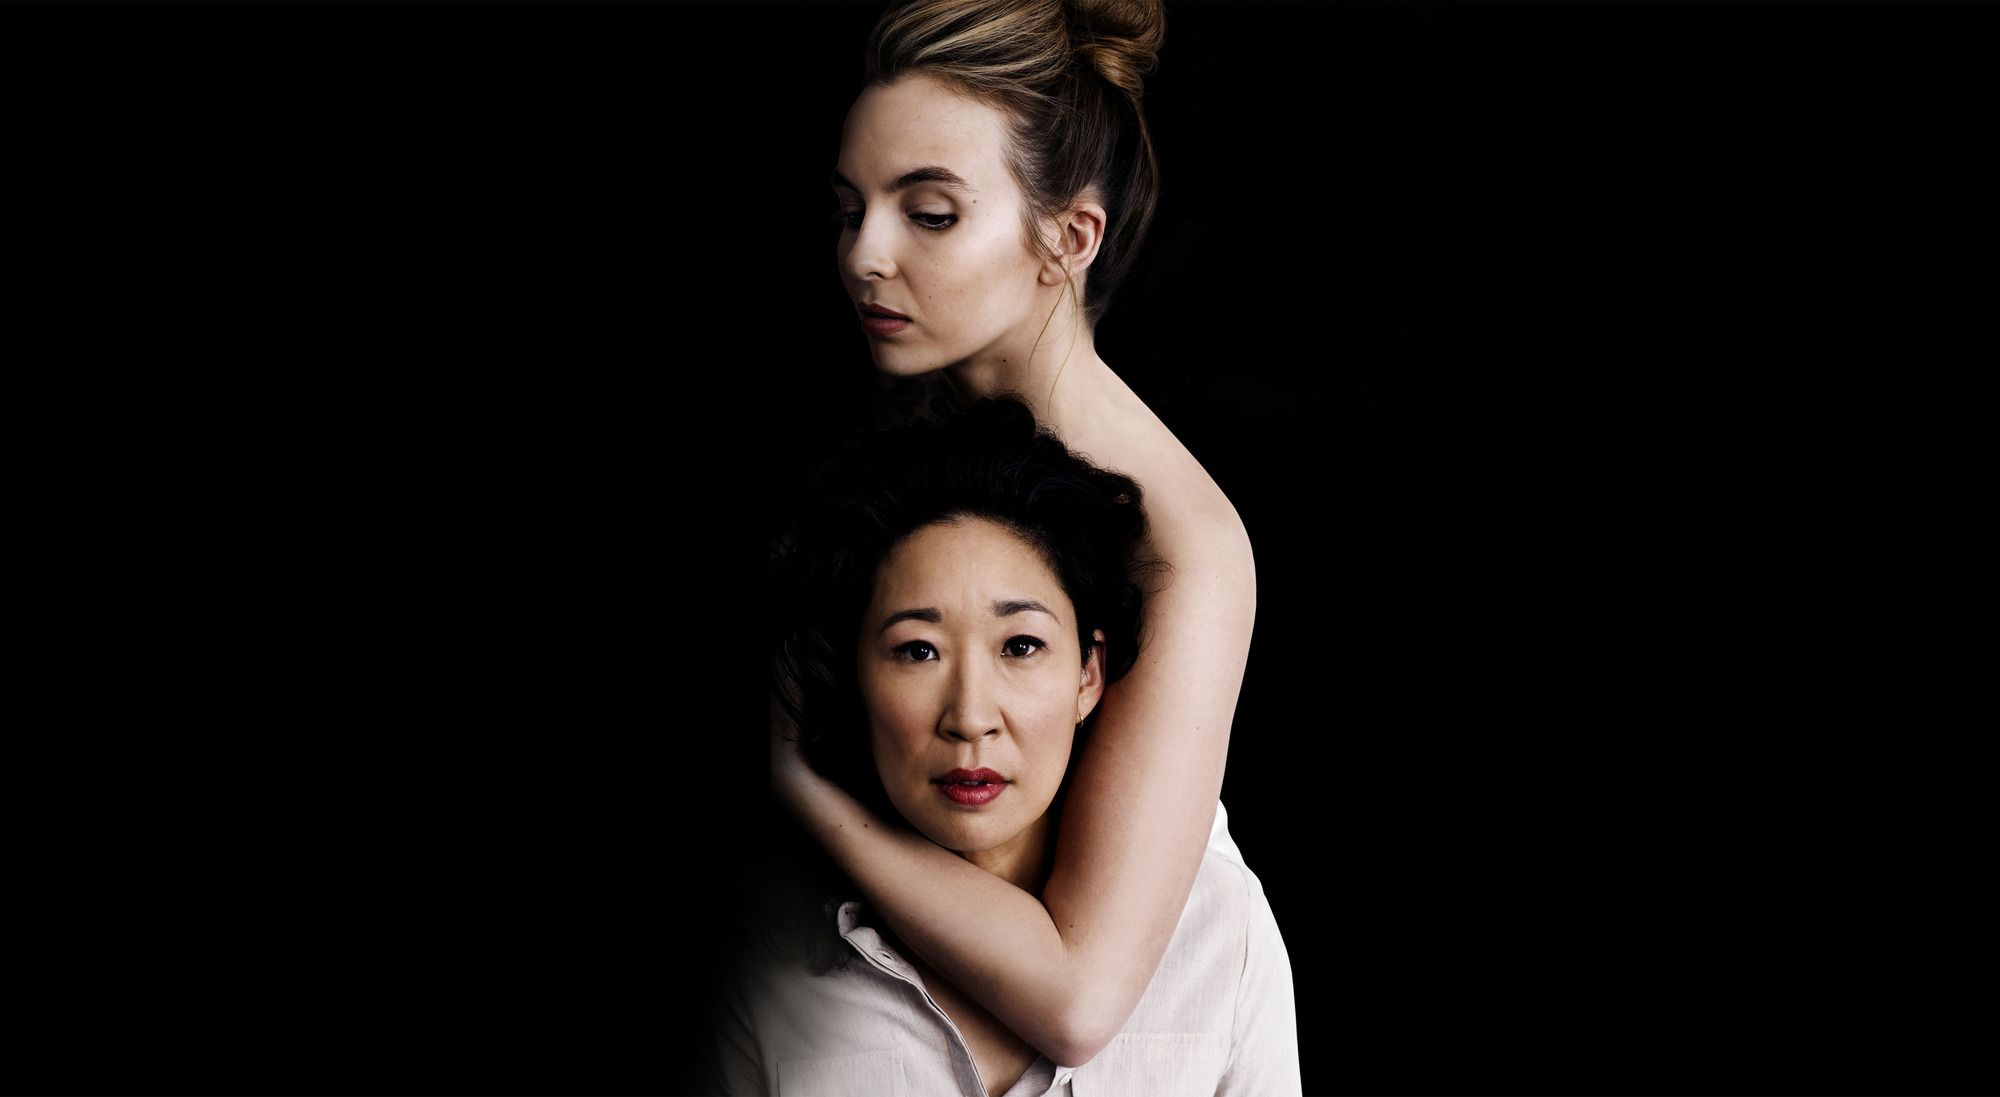 Season 3 of Killing Eve is coming back! Will Eve return in Season 3? Check out all the latest interesting updates here. 9